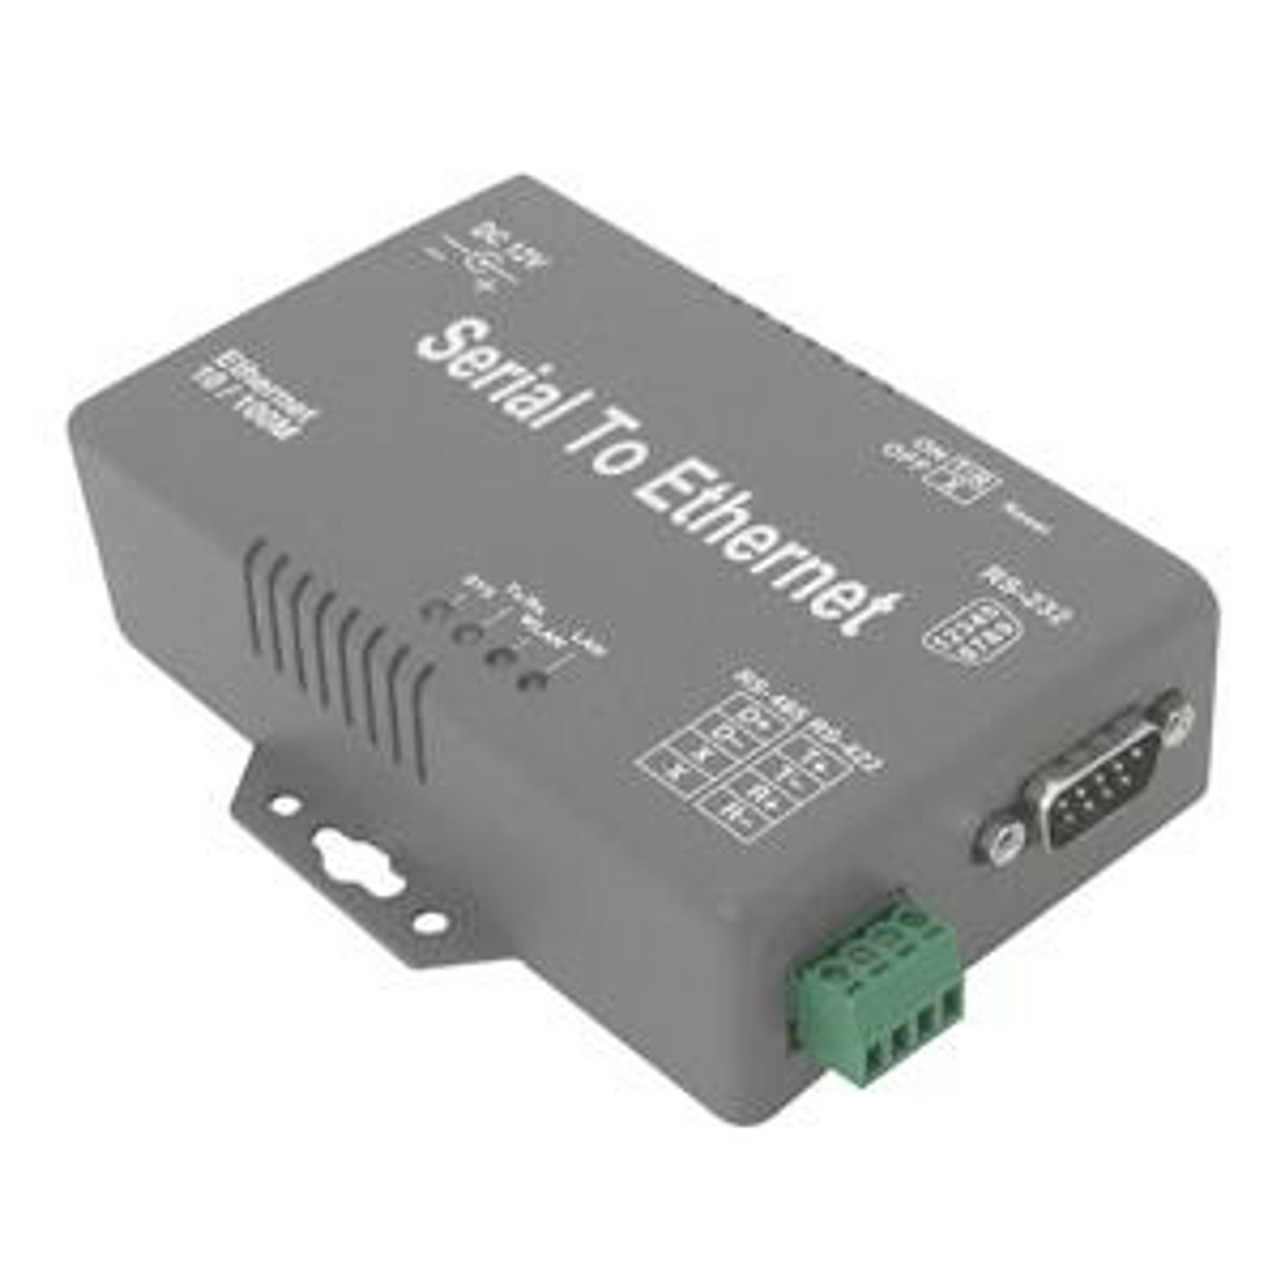 ID-DS0311-S1 SIIG Serial Device Server Ultima 1 x DB-9 Serial, 1 x Serial